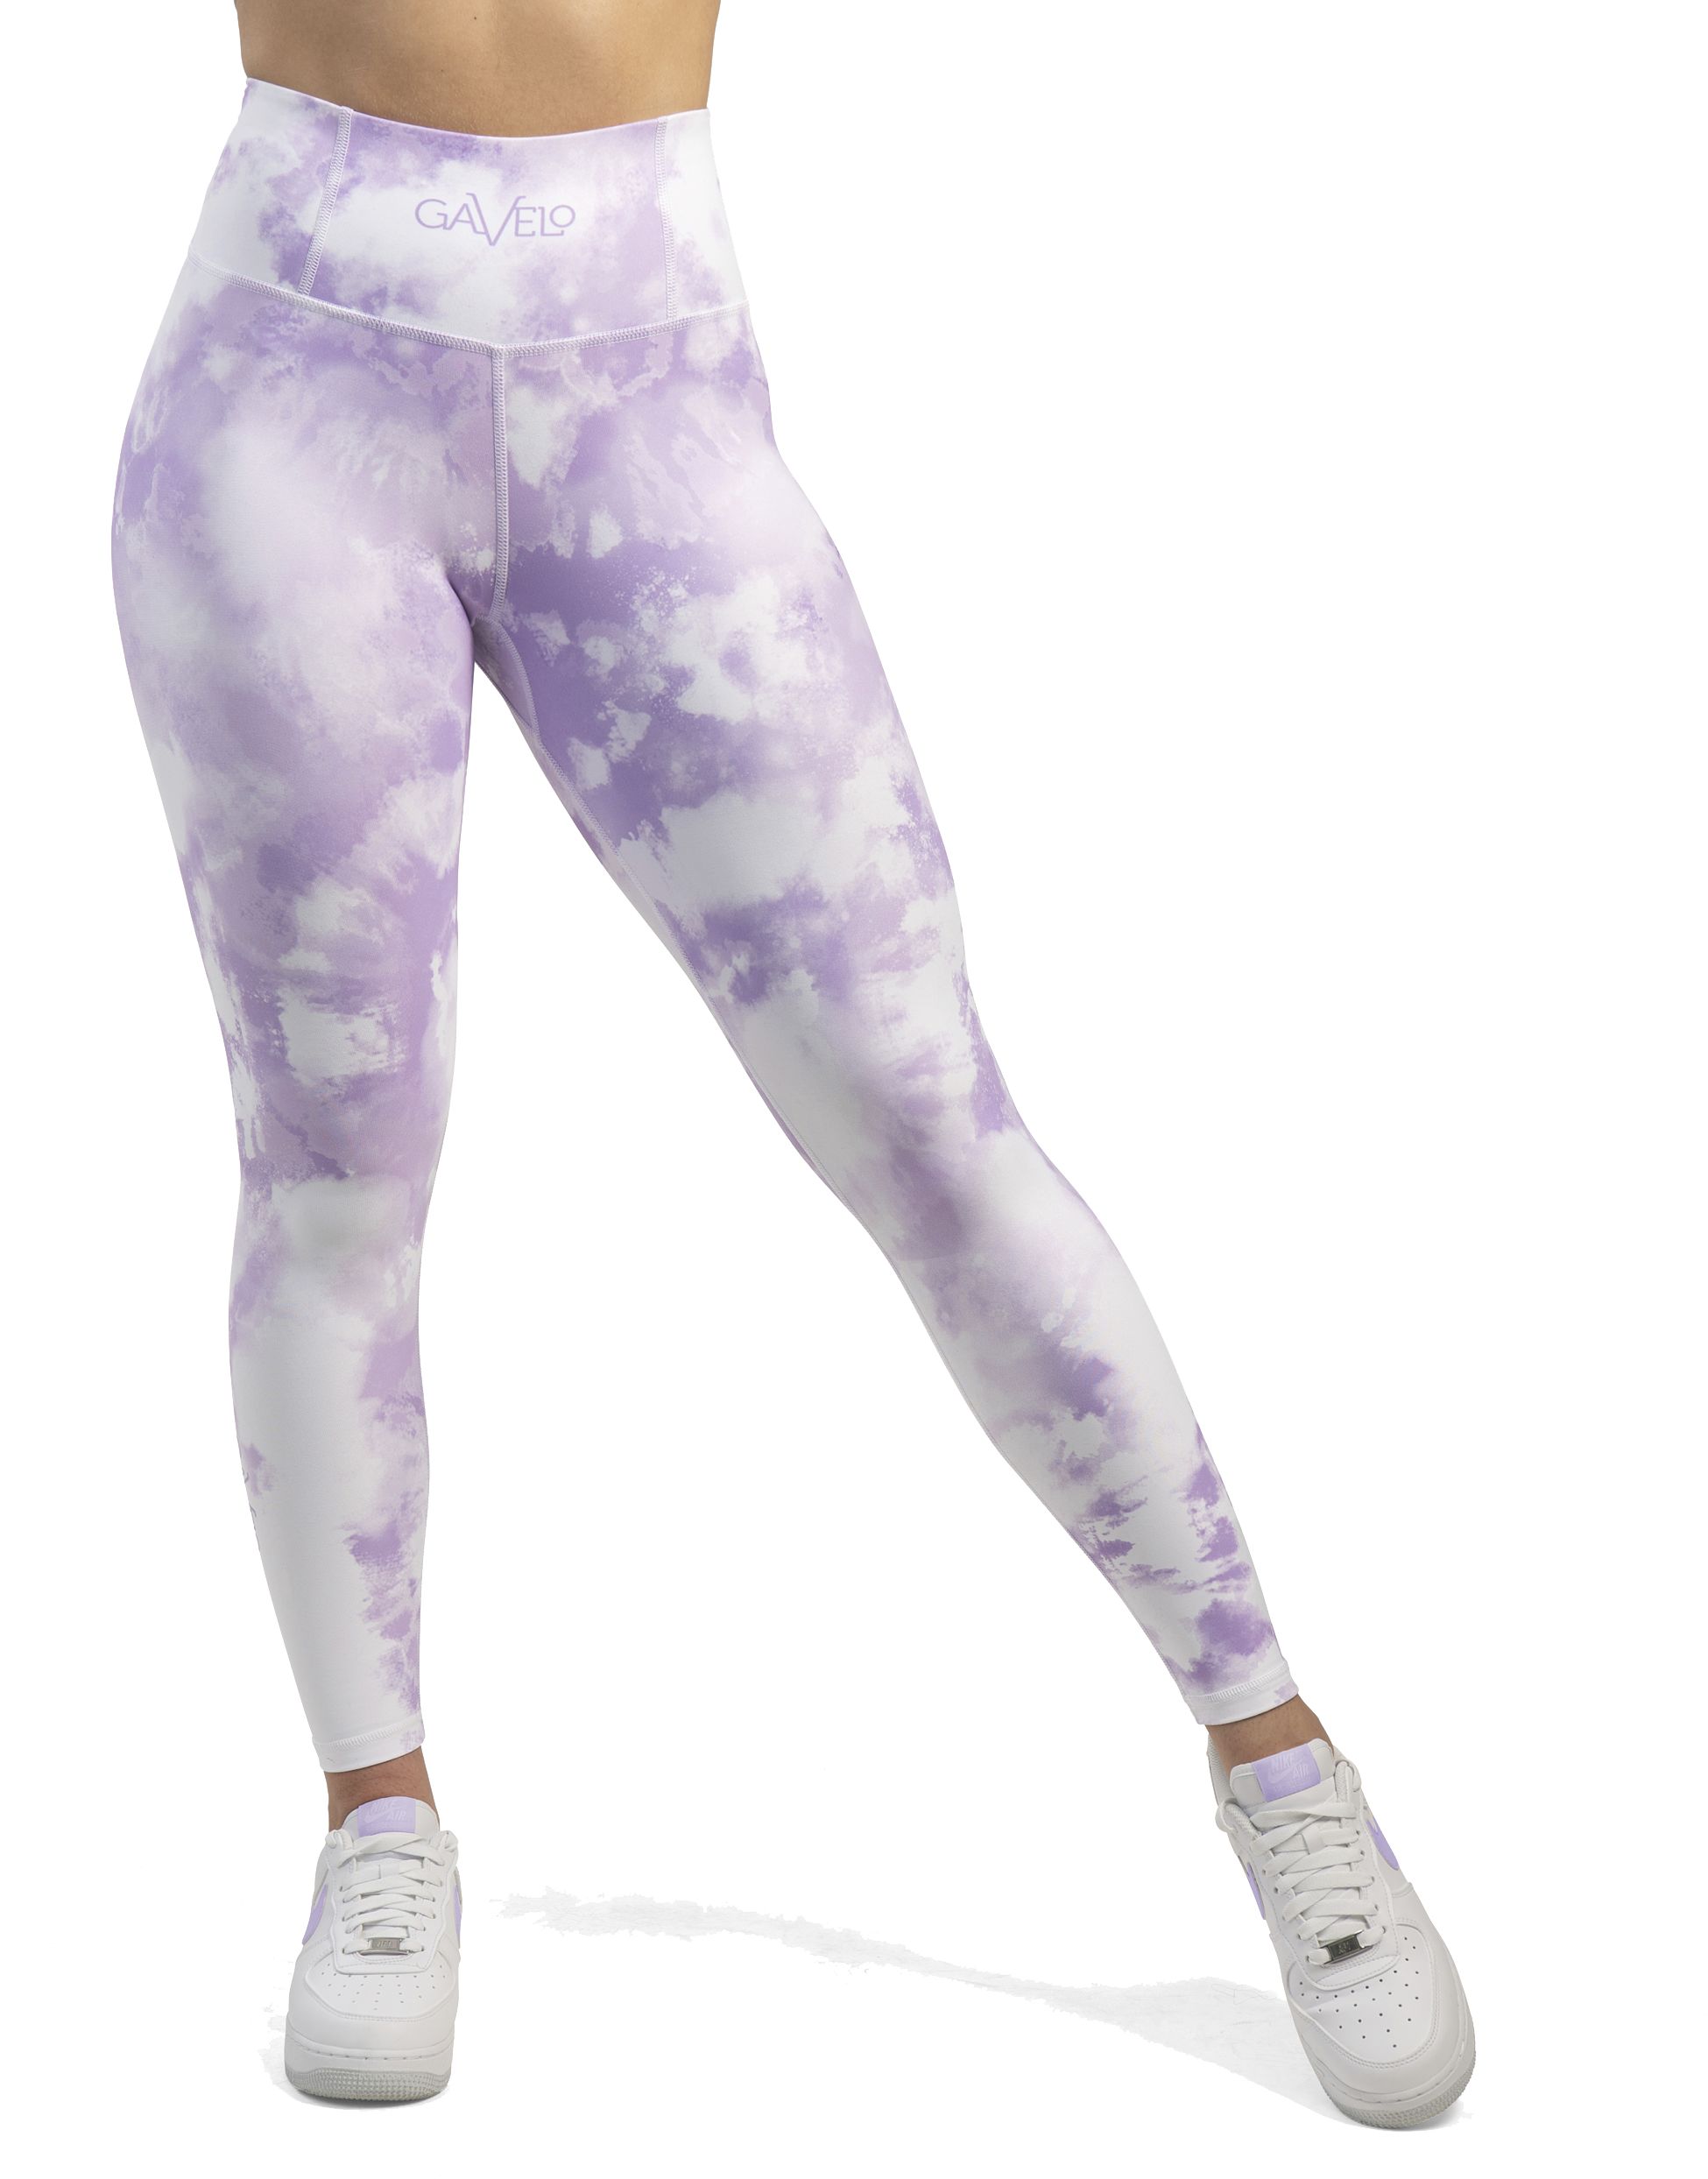 GAVELO, W PURPLE SPARKS TIGHTS